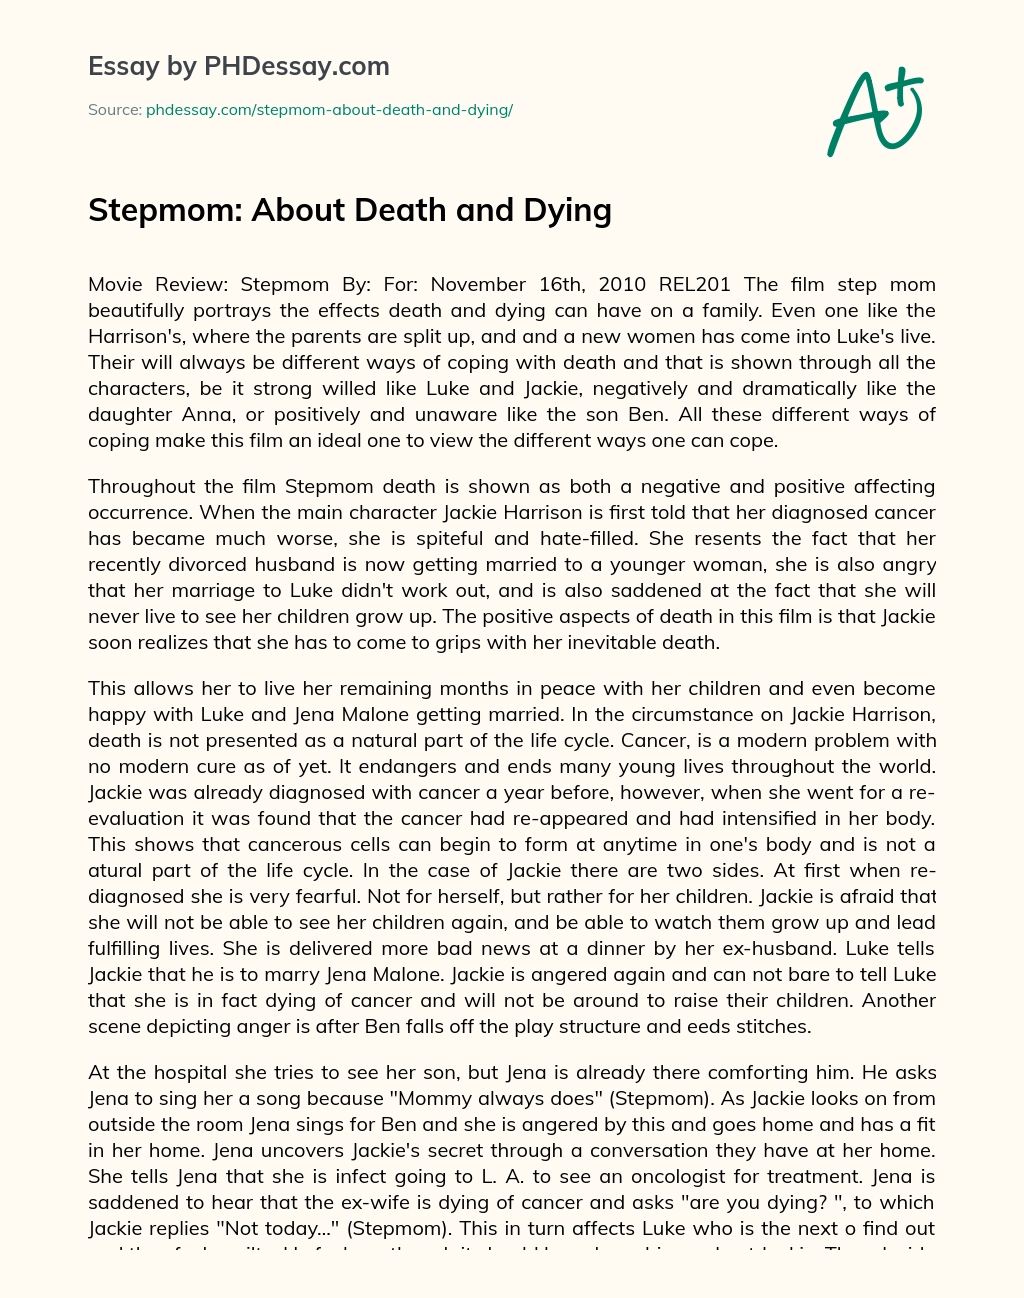 Stepmom: About Death and Dying essay